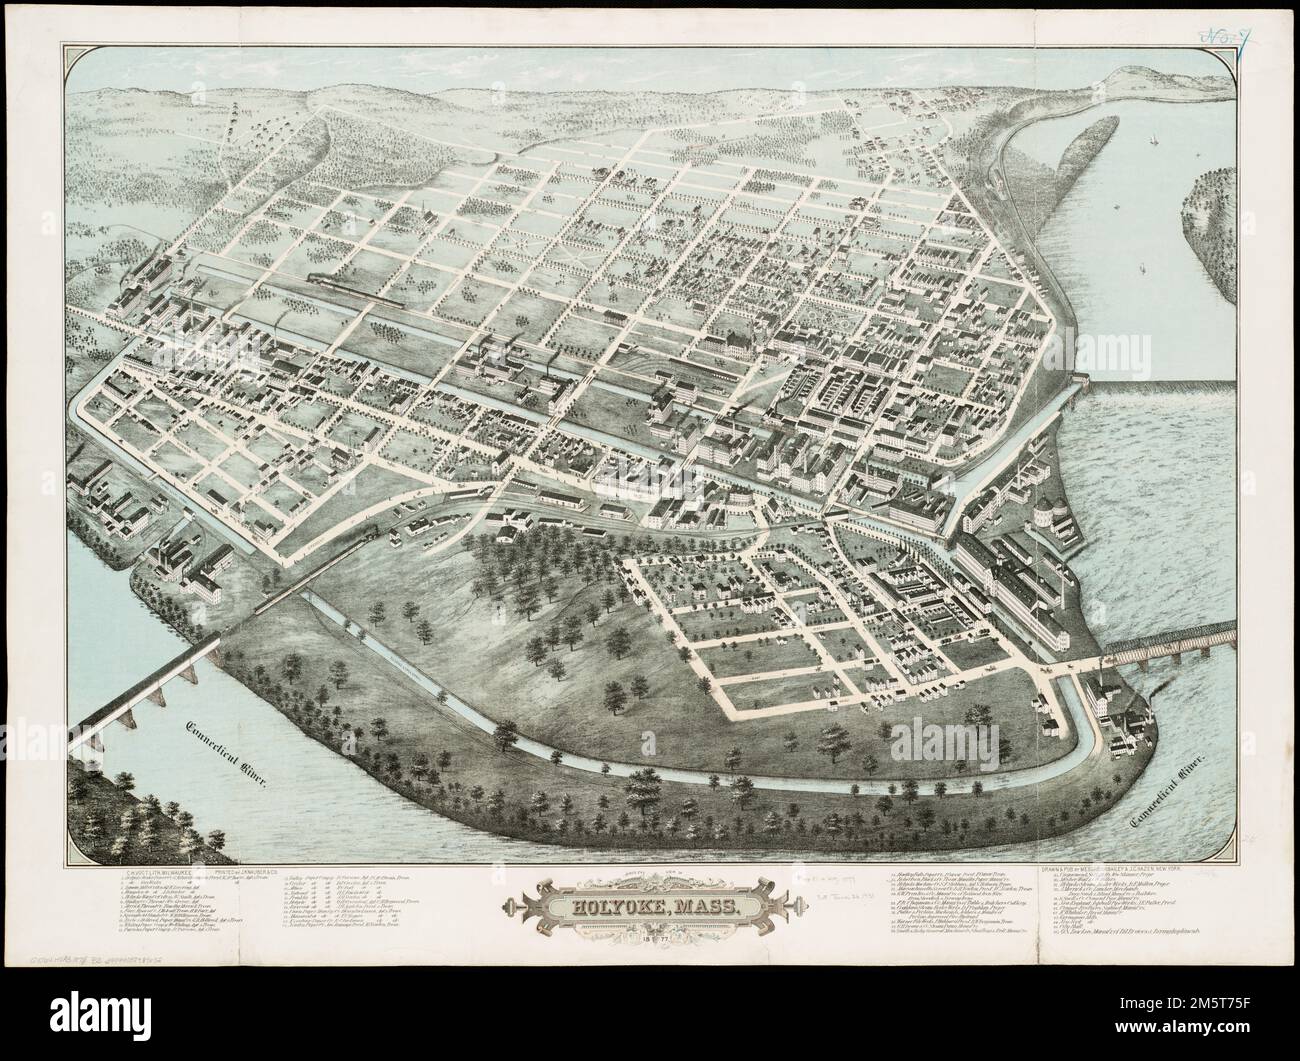 Bird's eye view of Holyoke, Mass : 1877. Includes index to points of interest.. Located on a bend of the Connecticut River adjacent to Hadley Falls, the industrial city of Holyoke is viewed from the southeast in this birds eye view. The dominant features of Baileys composition are the river, the falls, and a series of canals built to provide water power for potential industries. Although the area was settled in the early 18th century, large-scale industrial development did not become important in Holyoke until the late 1840s. At that time a group of Boston industrialists constructed a dam and Stock Photo